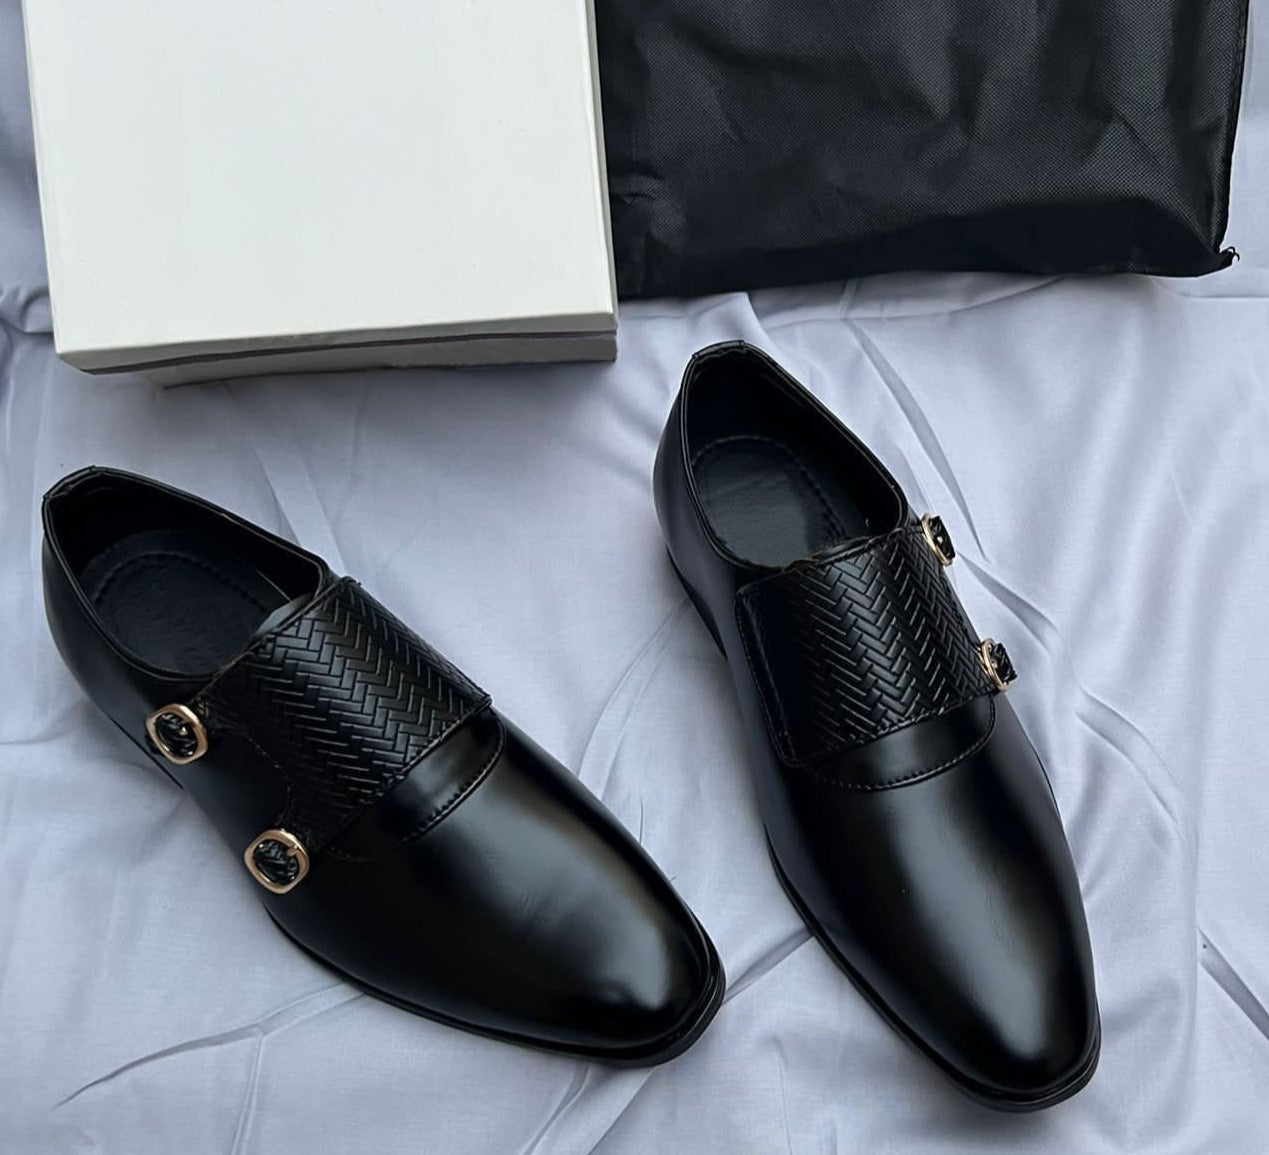 New High Quality Black Patent Faux Leather Upper Material with Durable Sole Quality-Jack marc